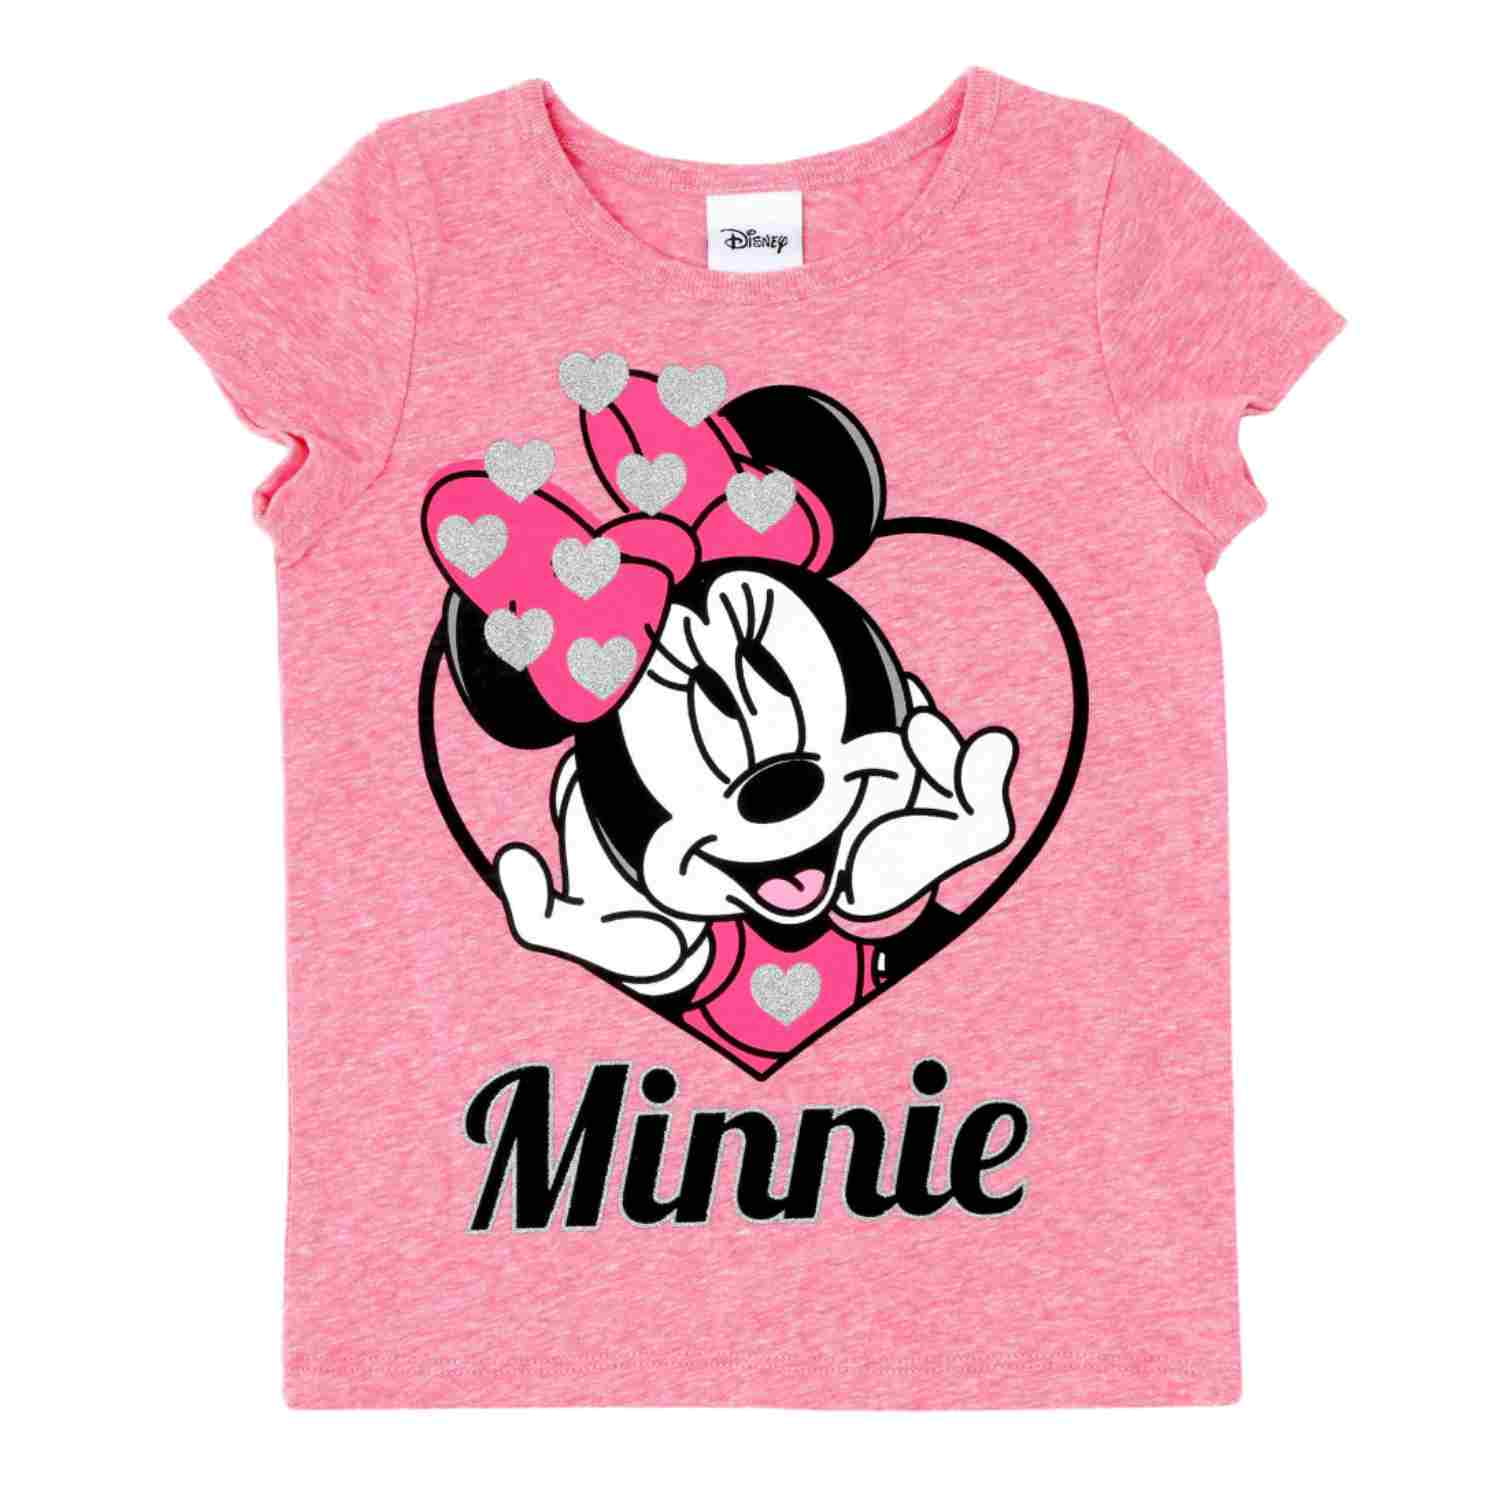 Valentine's Day Shirts Minnie Mouse Shirt Disney Valentine's Day Shirt So This is Love Shirt Minnie Mouse Valentine's Day Shirt